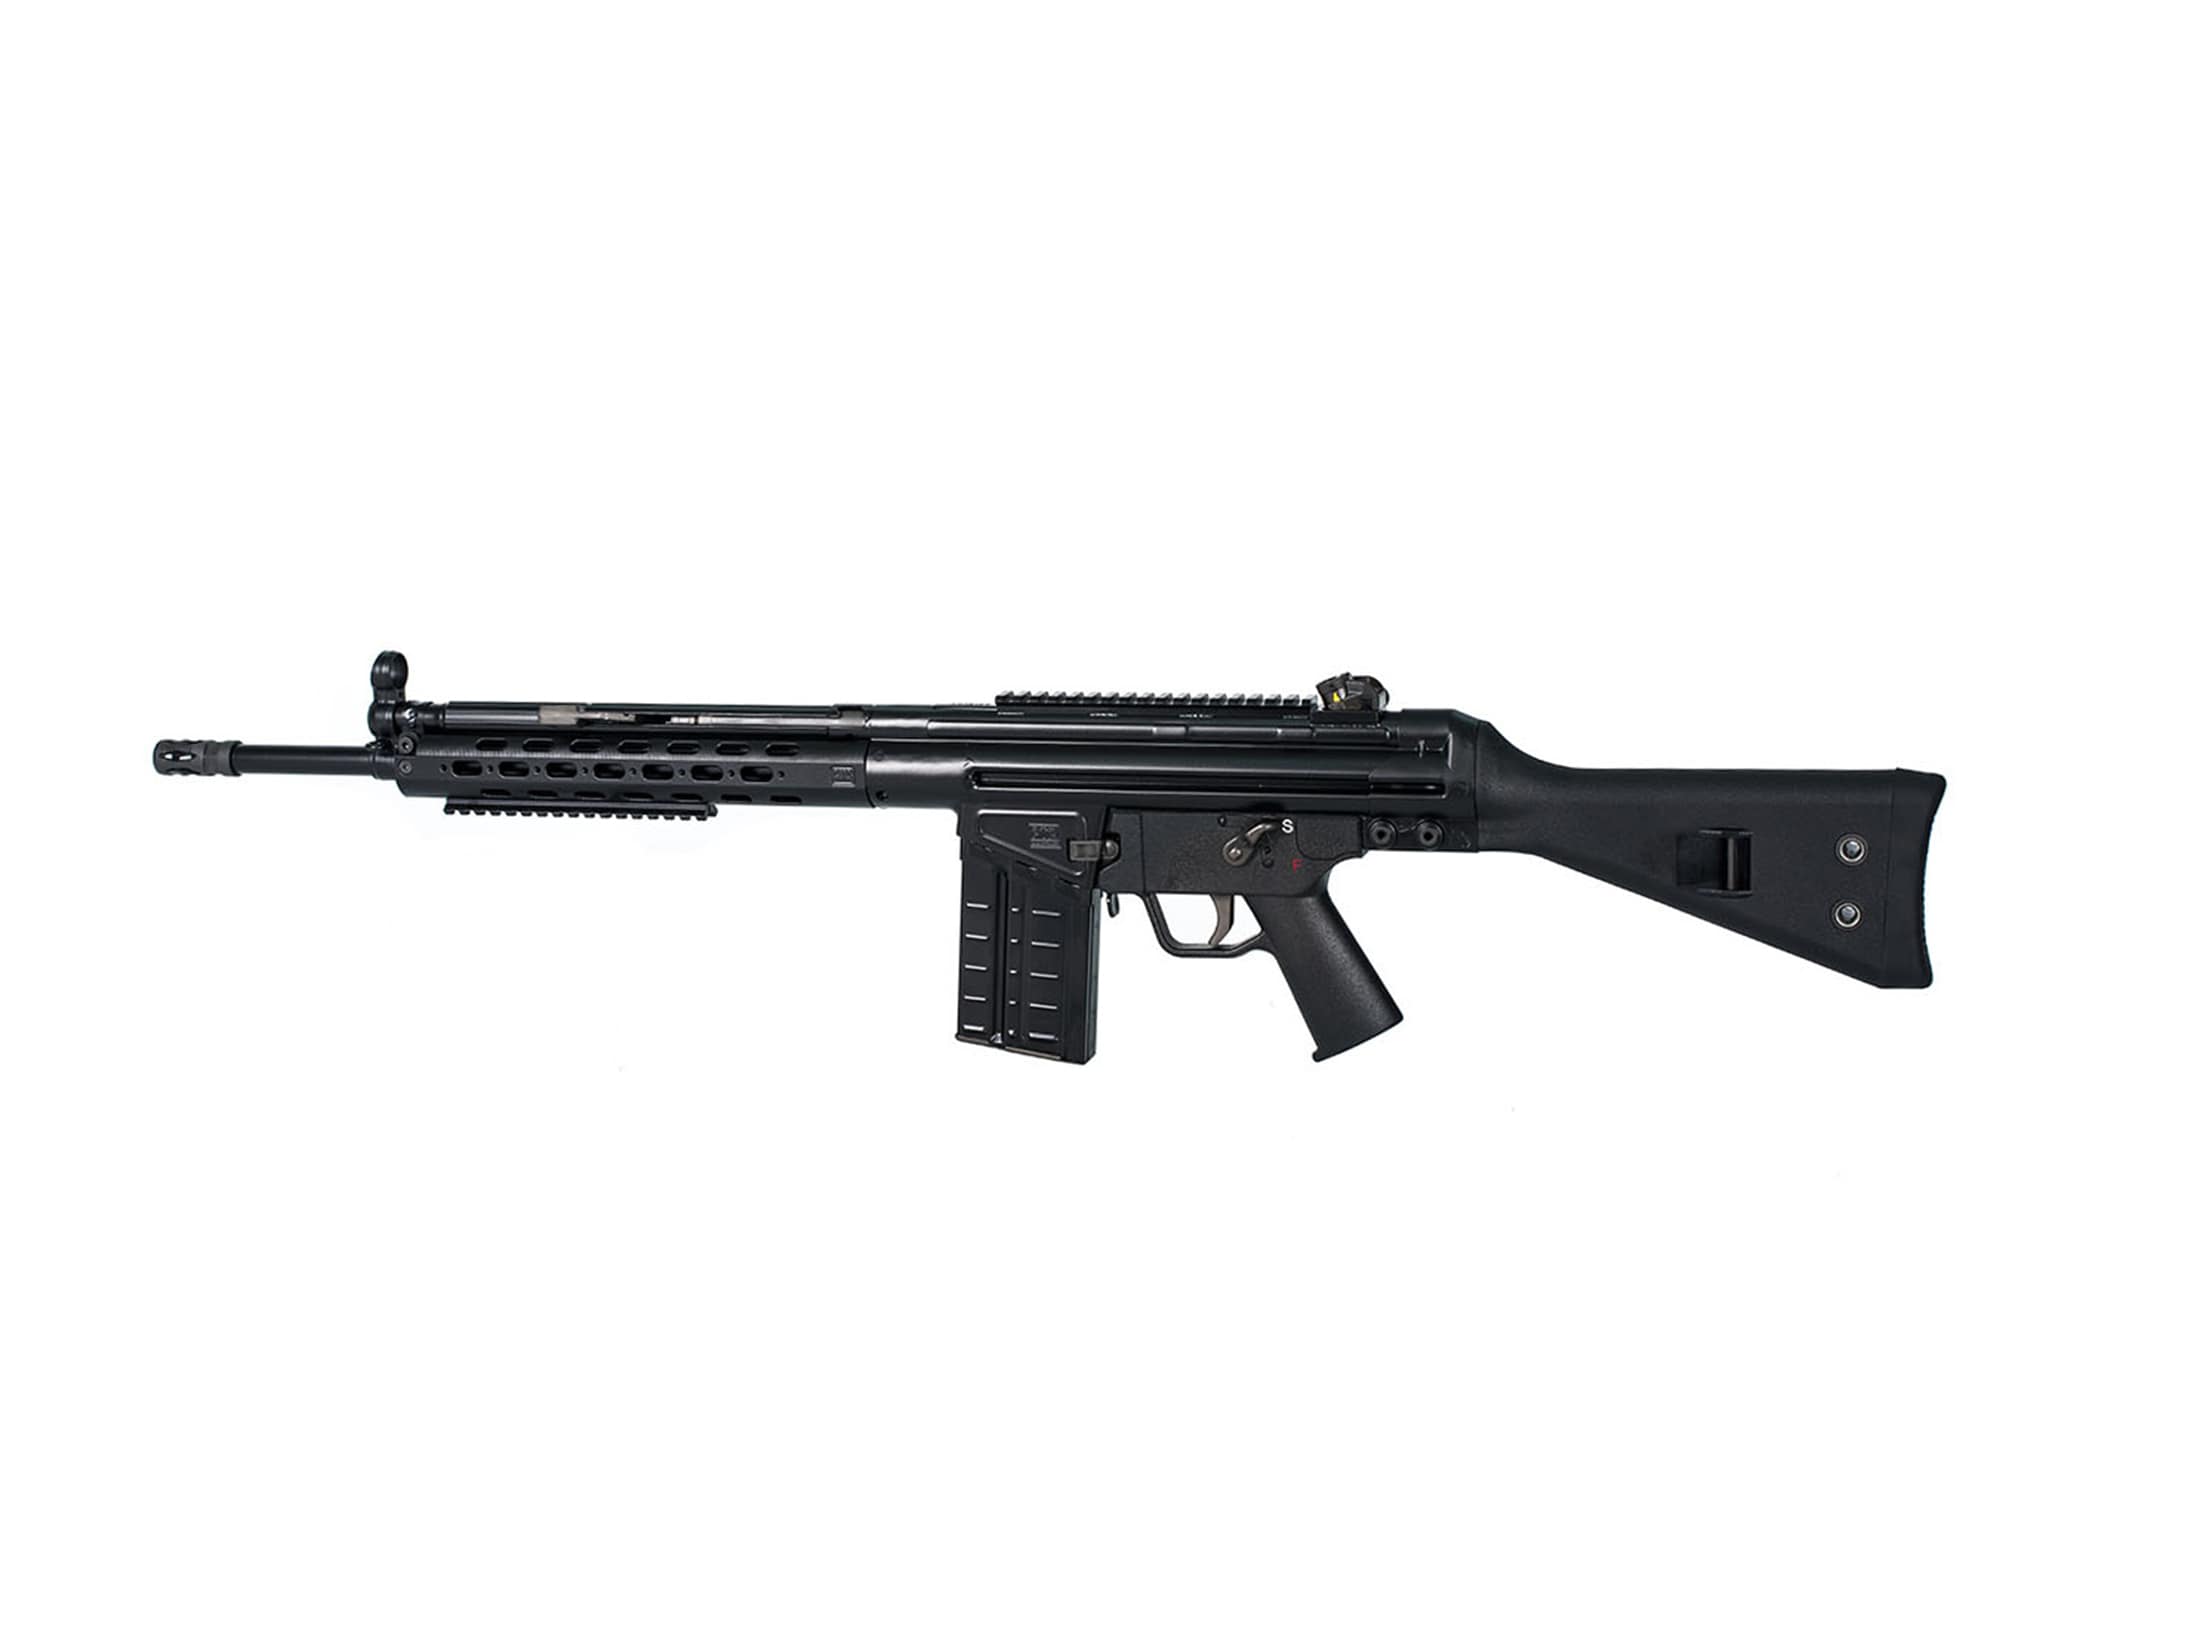 Image of PTR PTR-91FR Rifle 308 Winchester 18" Barrel with Tactical Handguard 20-Round Black